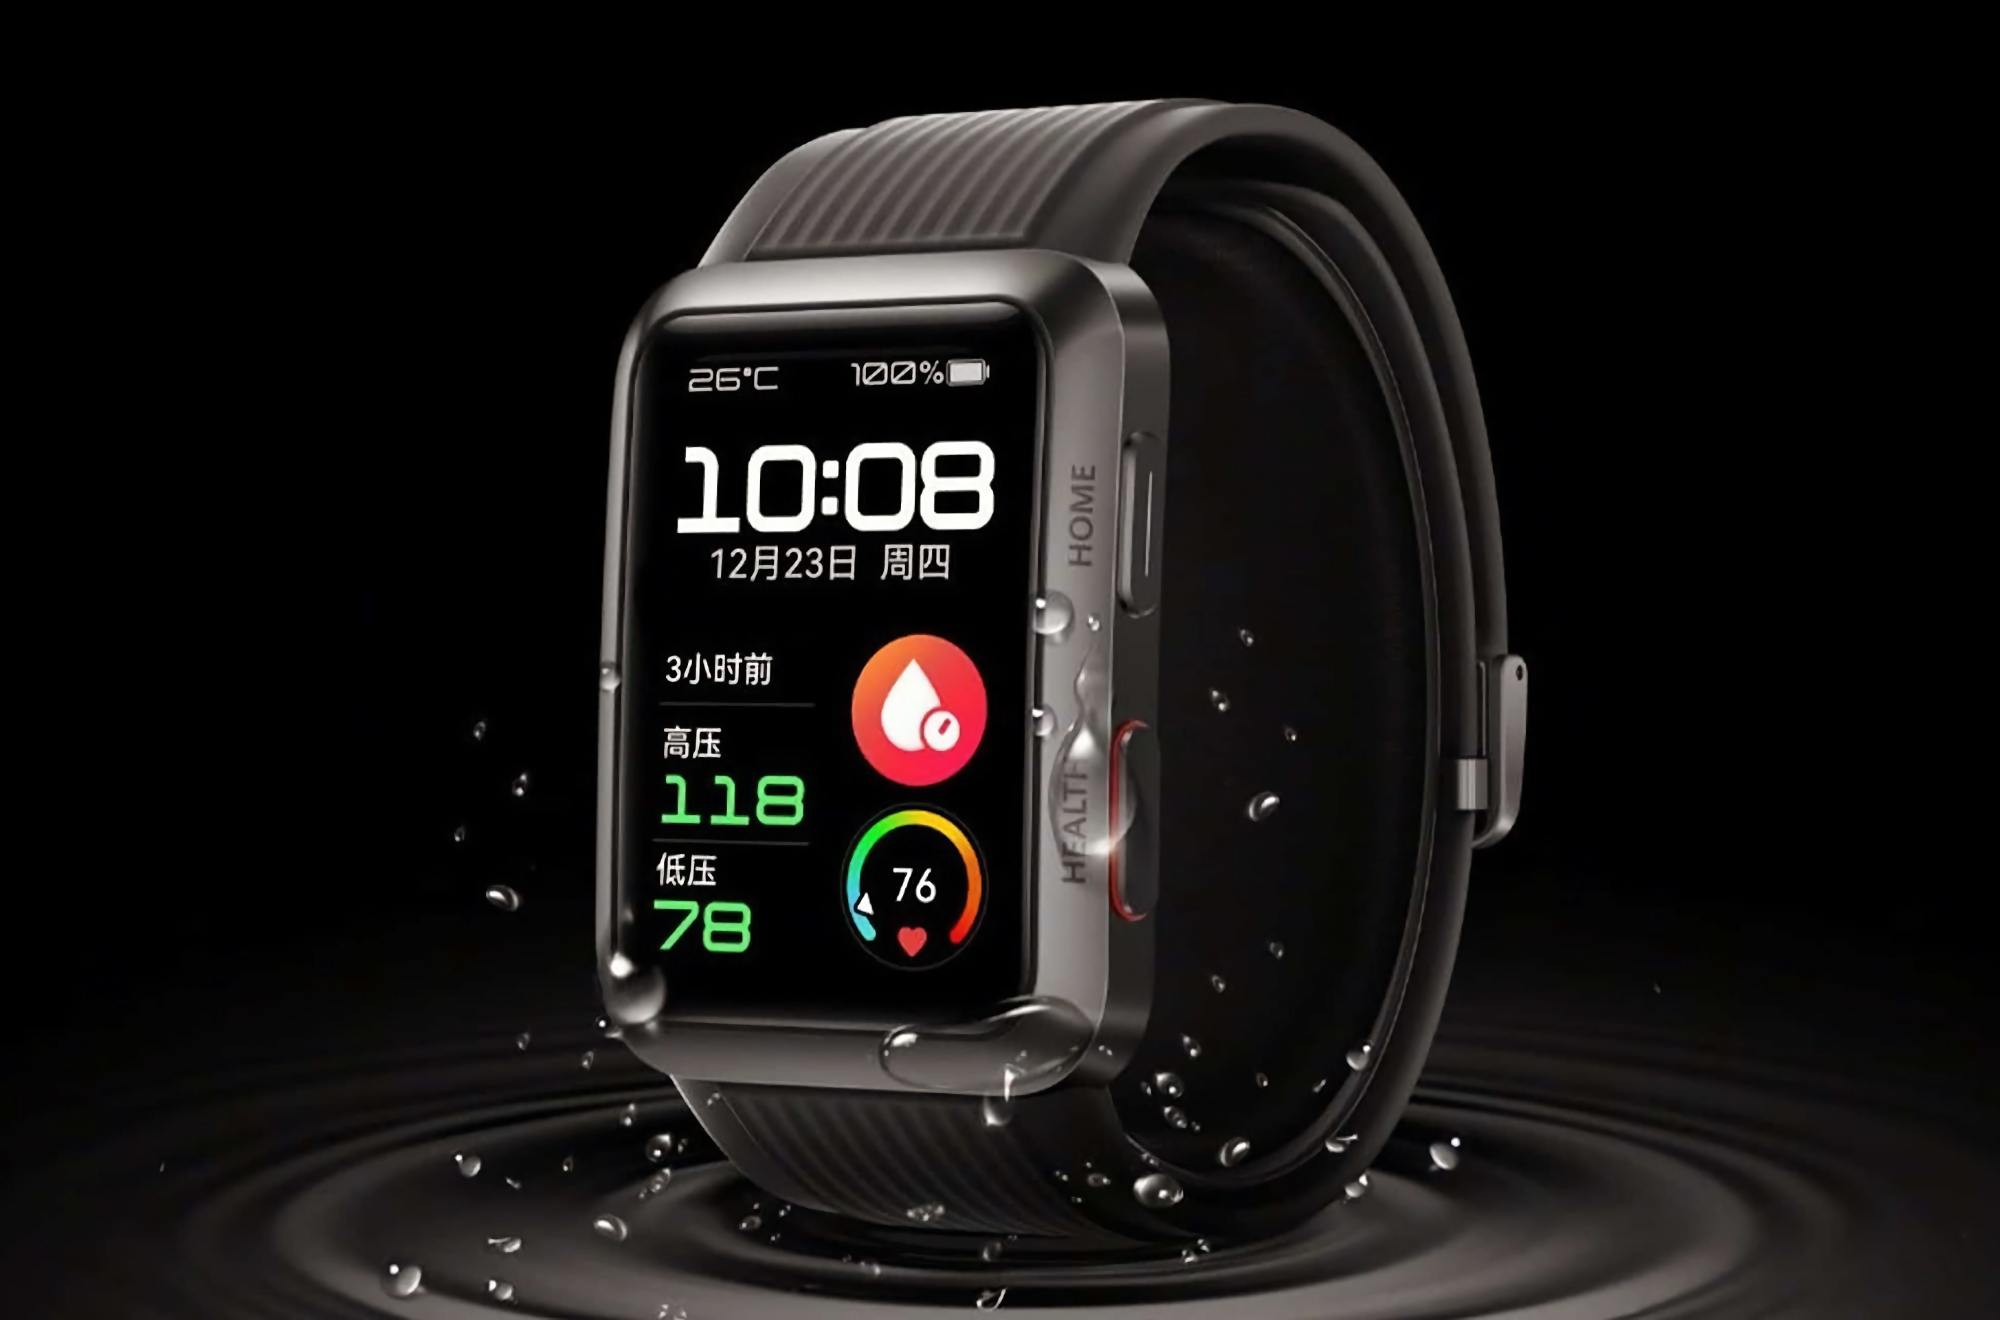 Rumour: Huawei is working on a Watch D2 smartwatch with blood pressure measurement function